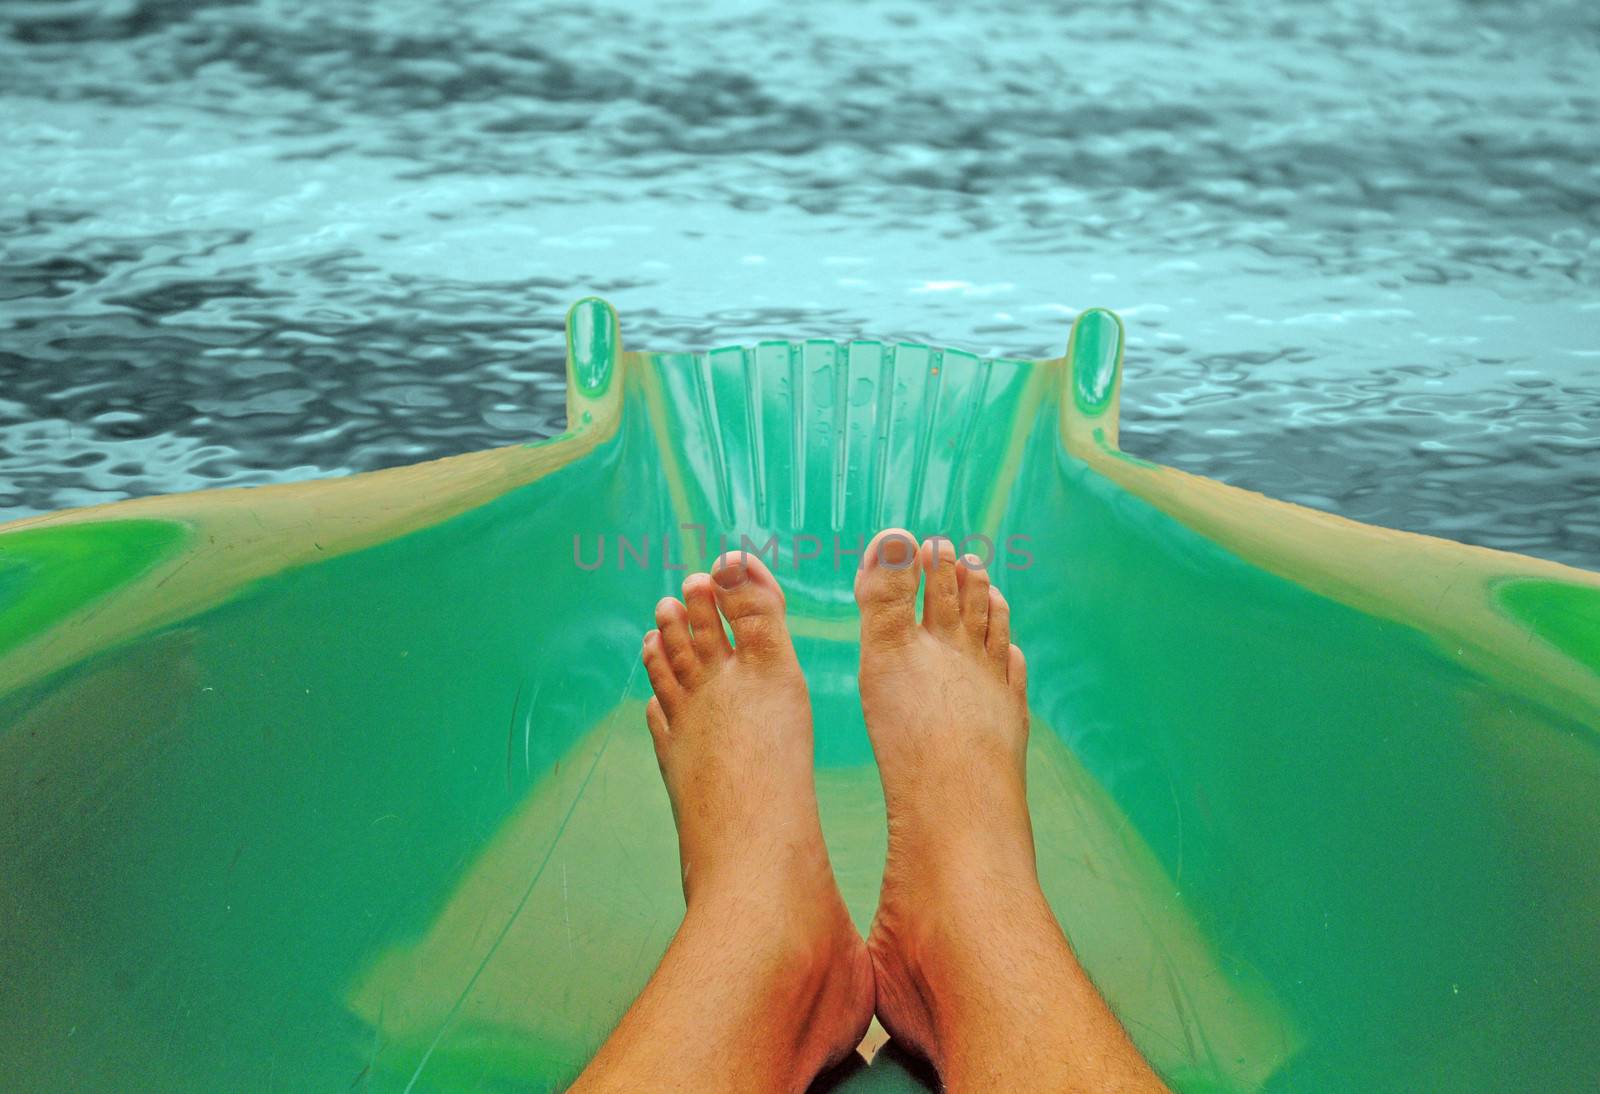 A pair of feet on a water slide about to land in a refreshing pool